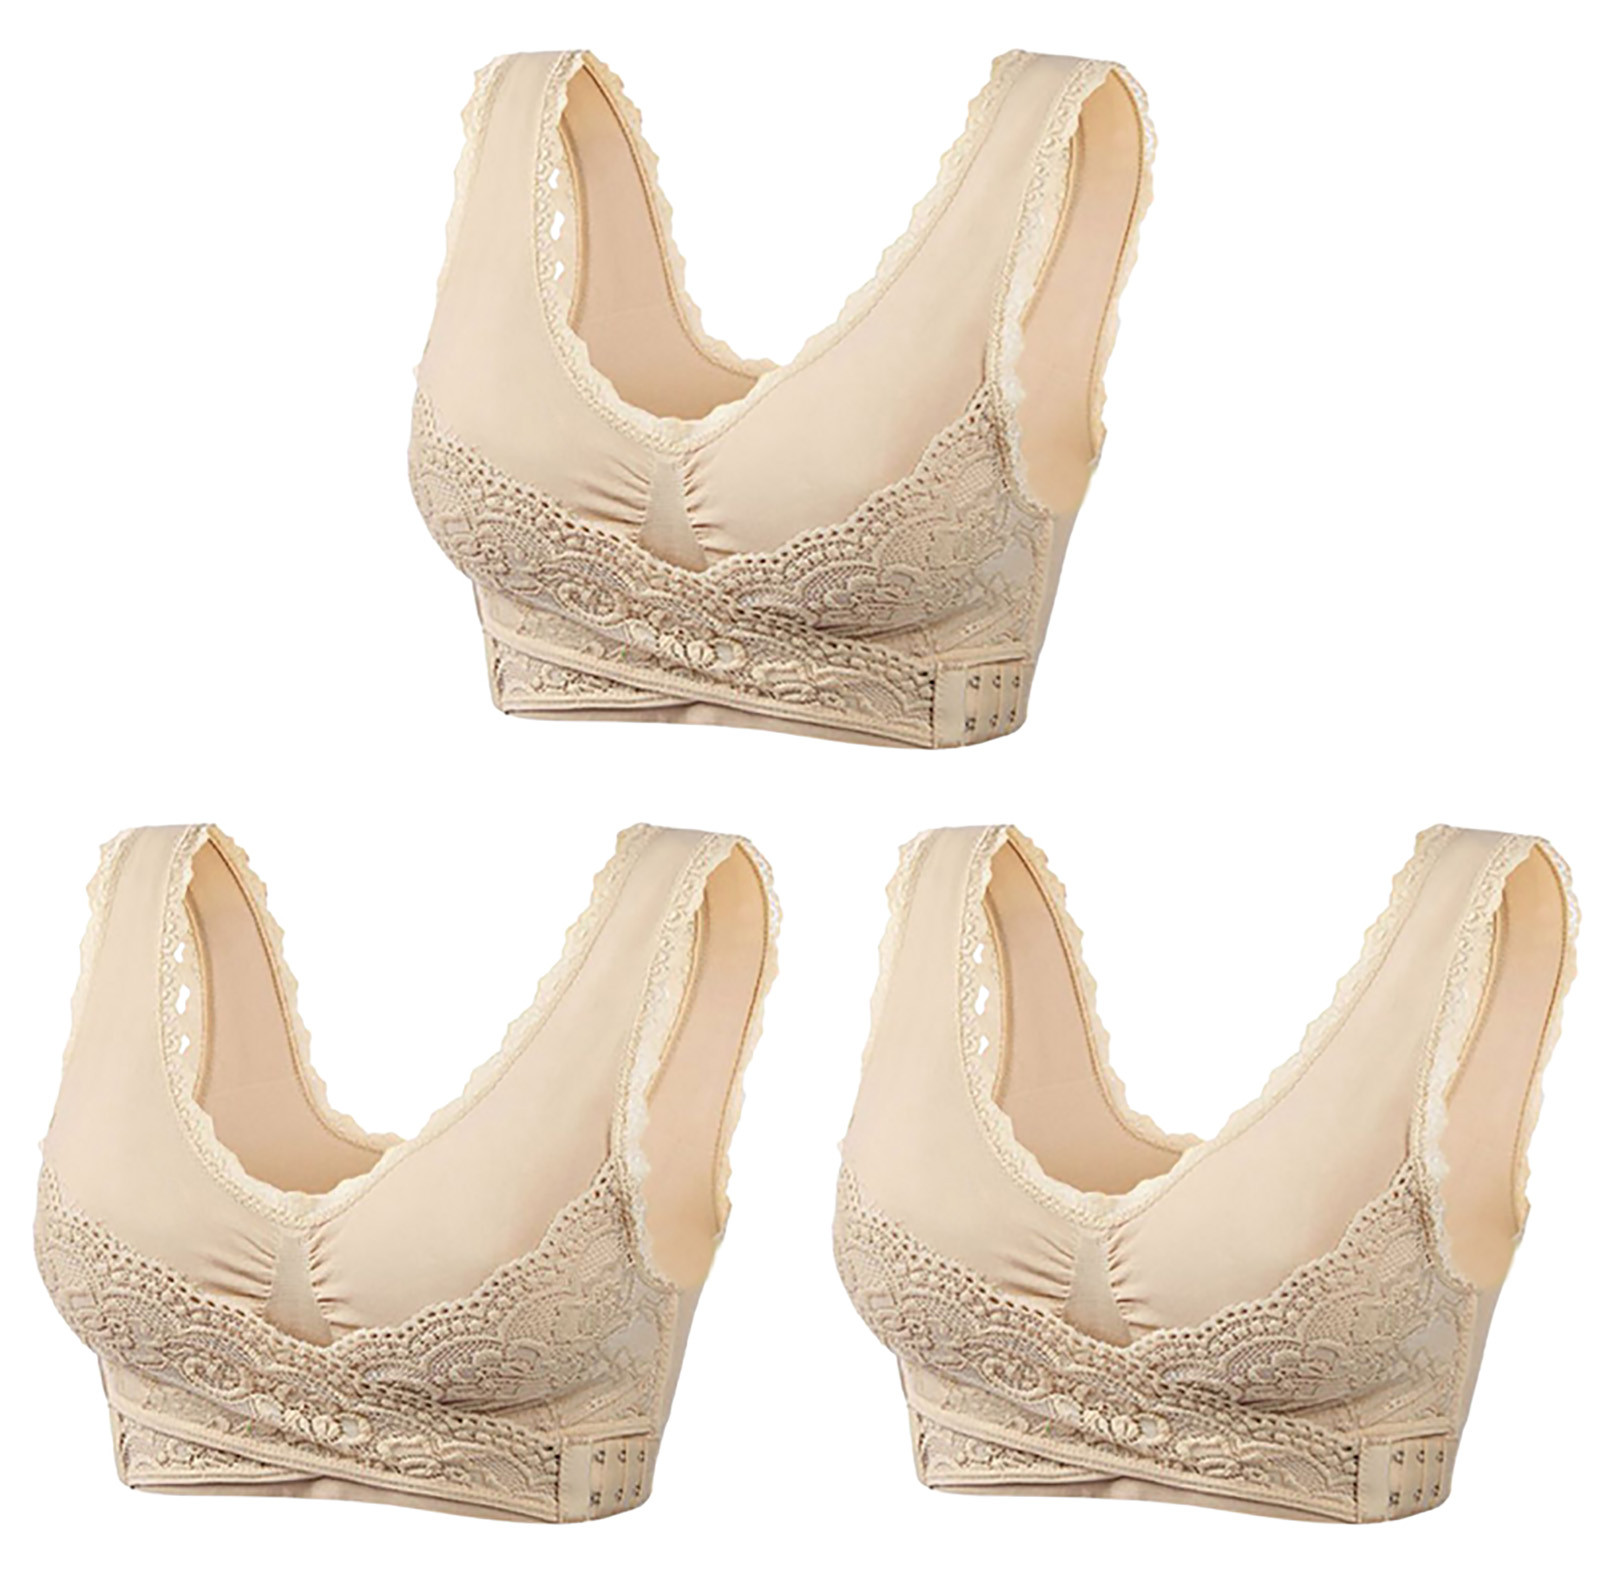 YWDJ Sexy Bras for Women Plus Size 3 Pack Front Close Lounge Bras ...